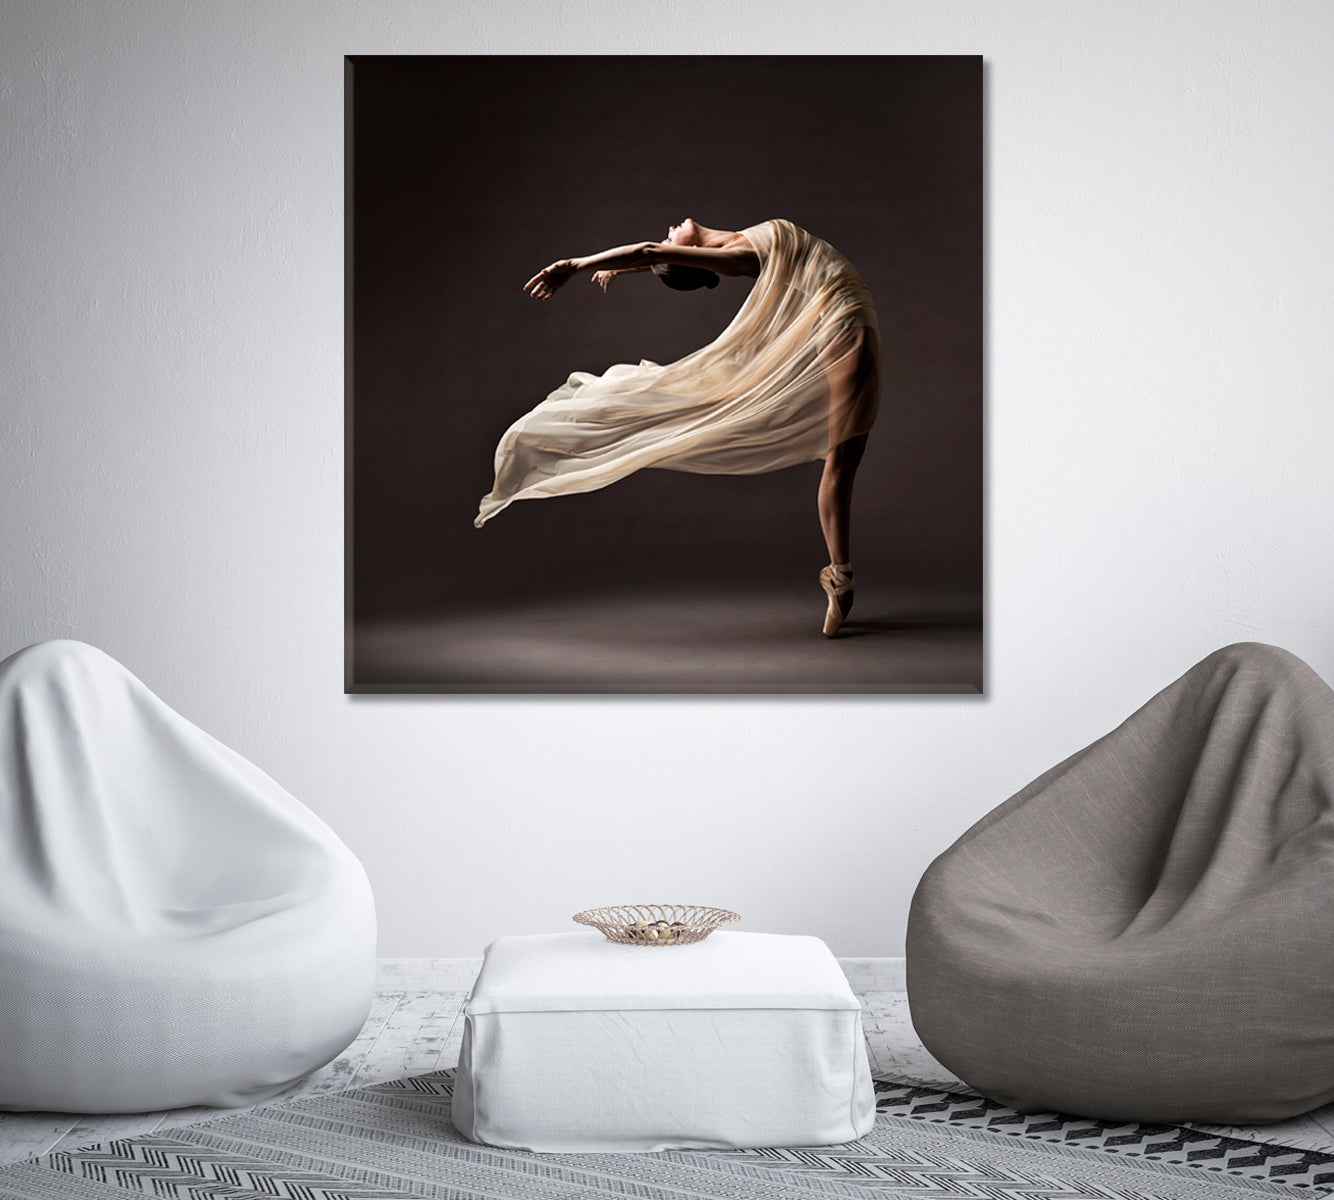 Flexible Ballerina in Delicate Silk Dress and Pointes Canvas Print-Canvas Print-CetArt-1 panel-12x12 inches-CetArt